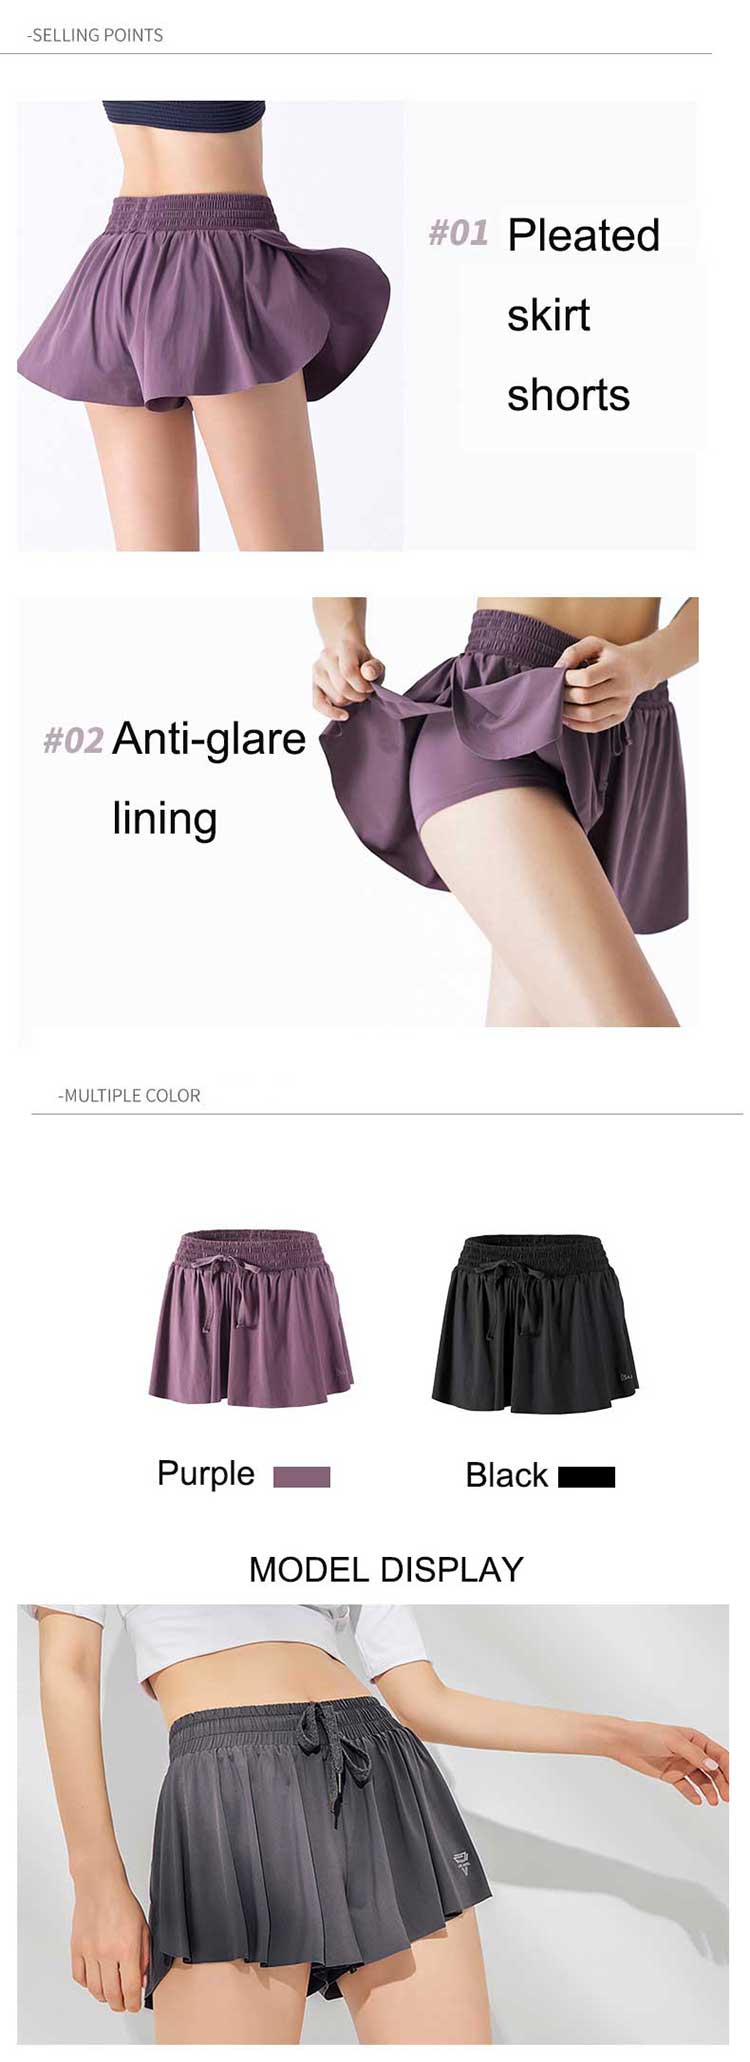 This-is-a-beautiful--double-layer-running-shorts-with-both-appearance-and-function